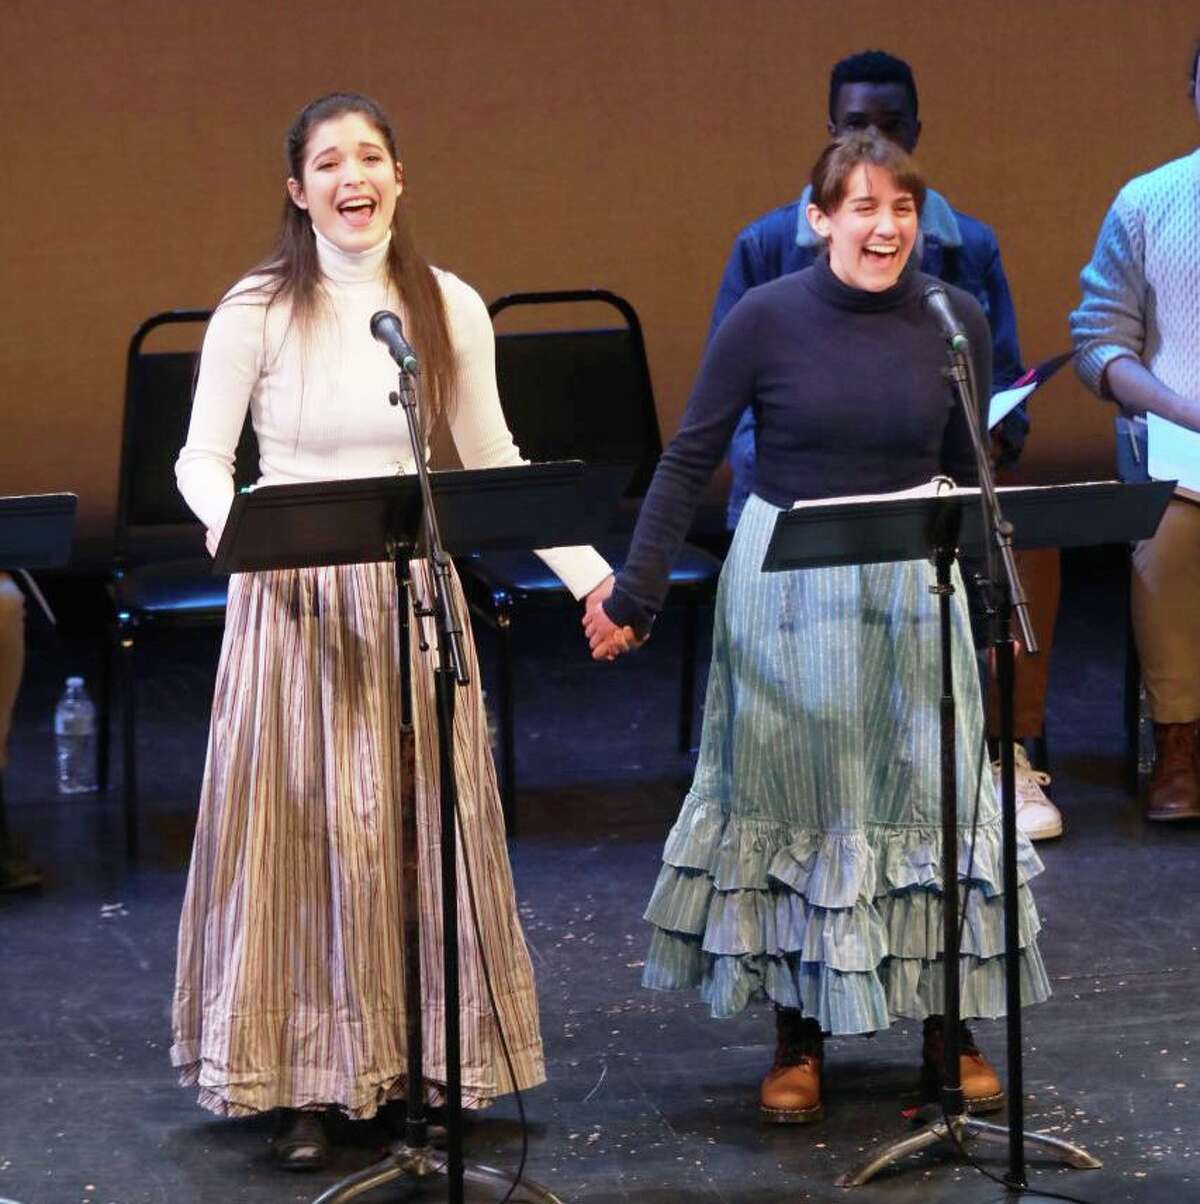 A “Sweet 16” is being celebrated at Goodspeed’s Festival of New Musicals in East Haddam.